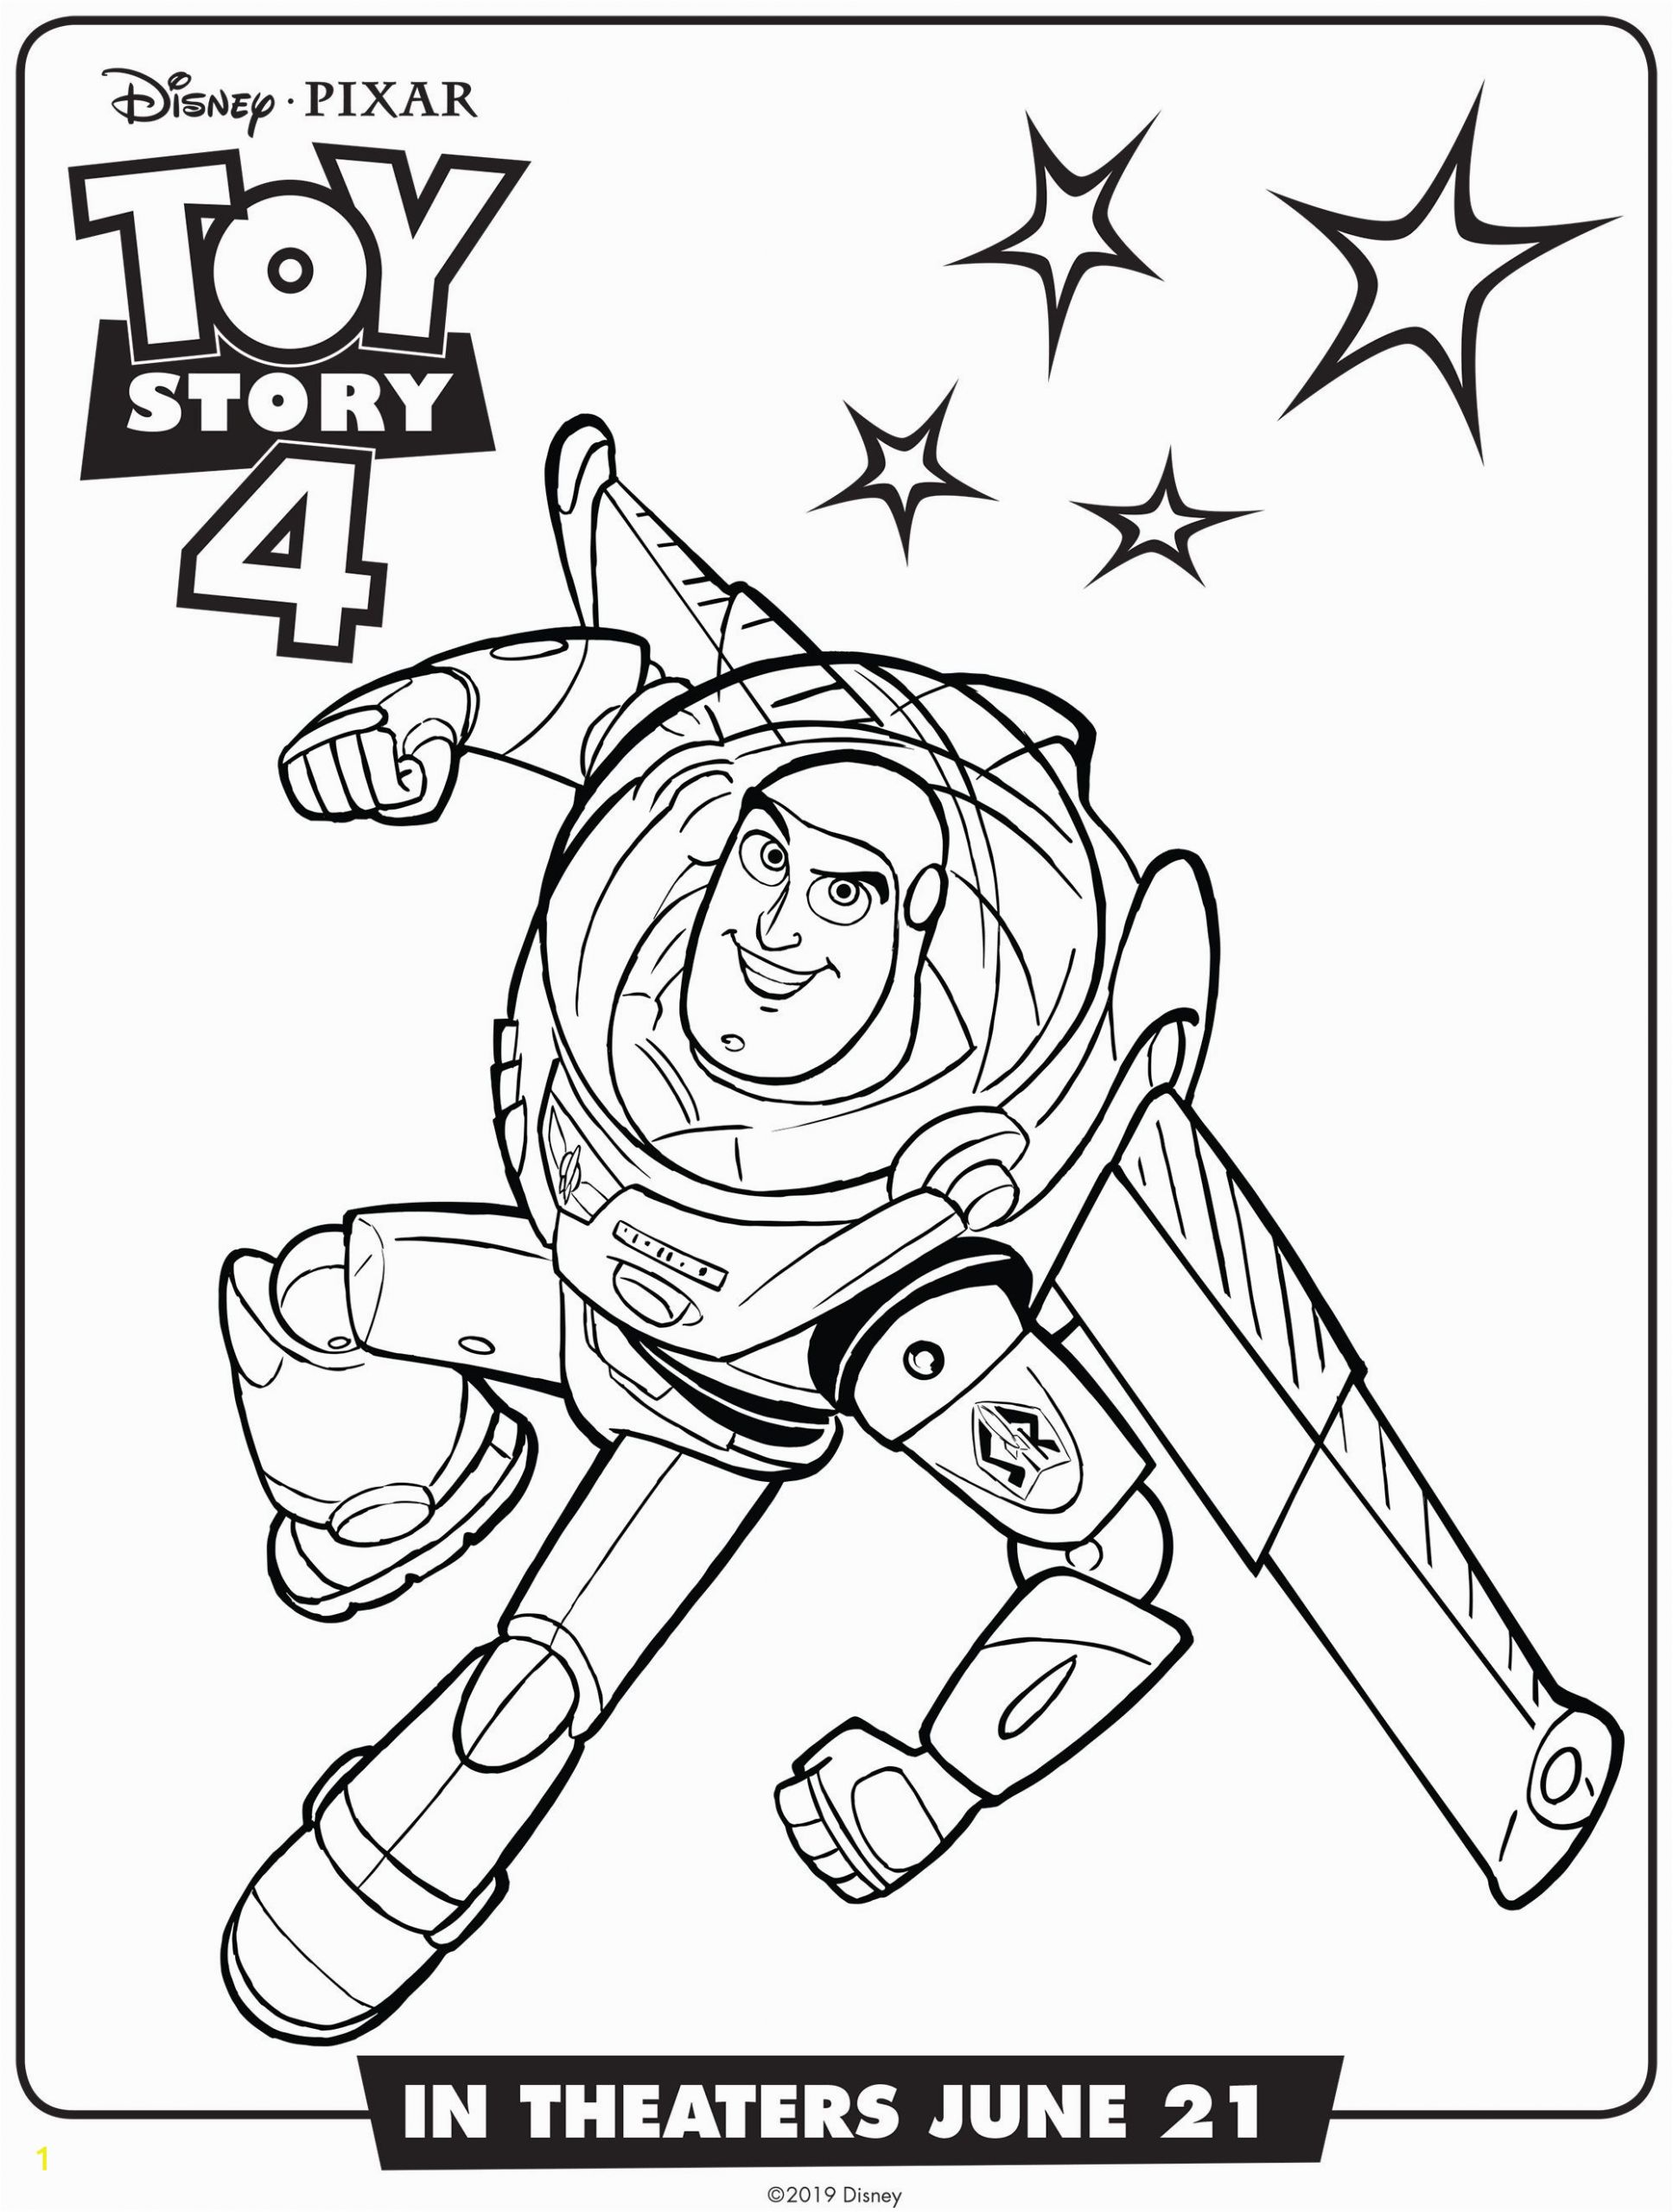 Toy Story Buzz Lightyear Coloring Pages Buzz Lightyear toy Story 4 Coloring Page Disney Pixar